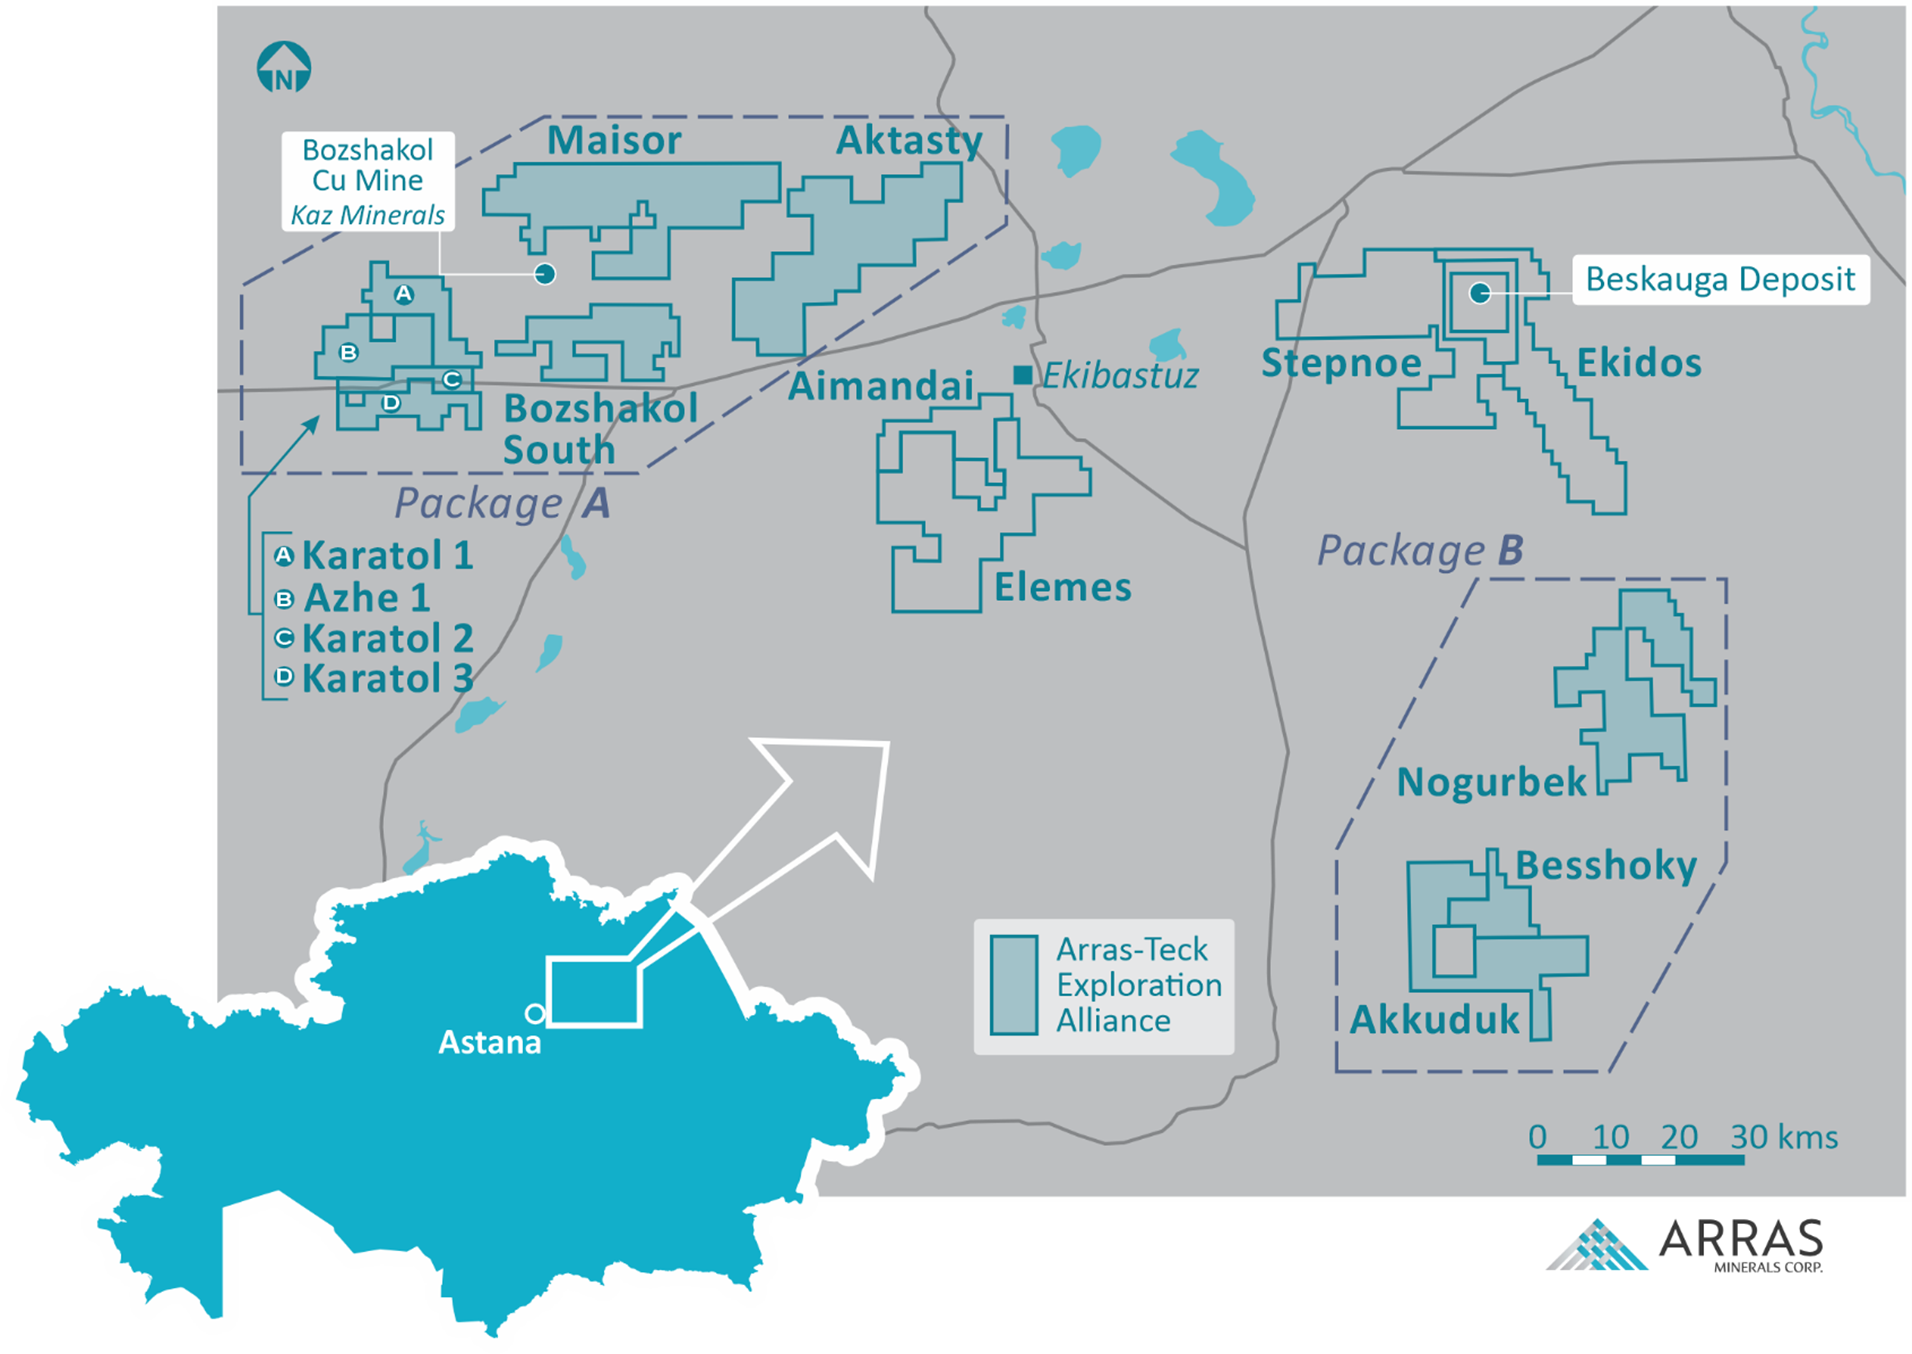 Arras's License Package showing Arras-Teck Strategic Alliance Areas as 